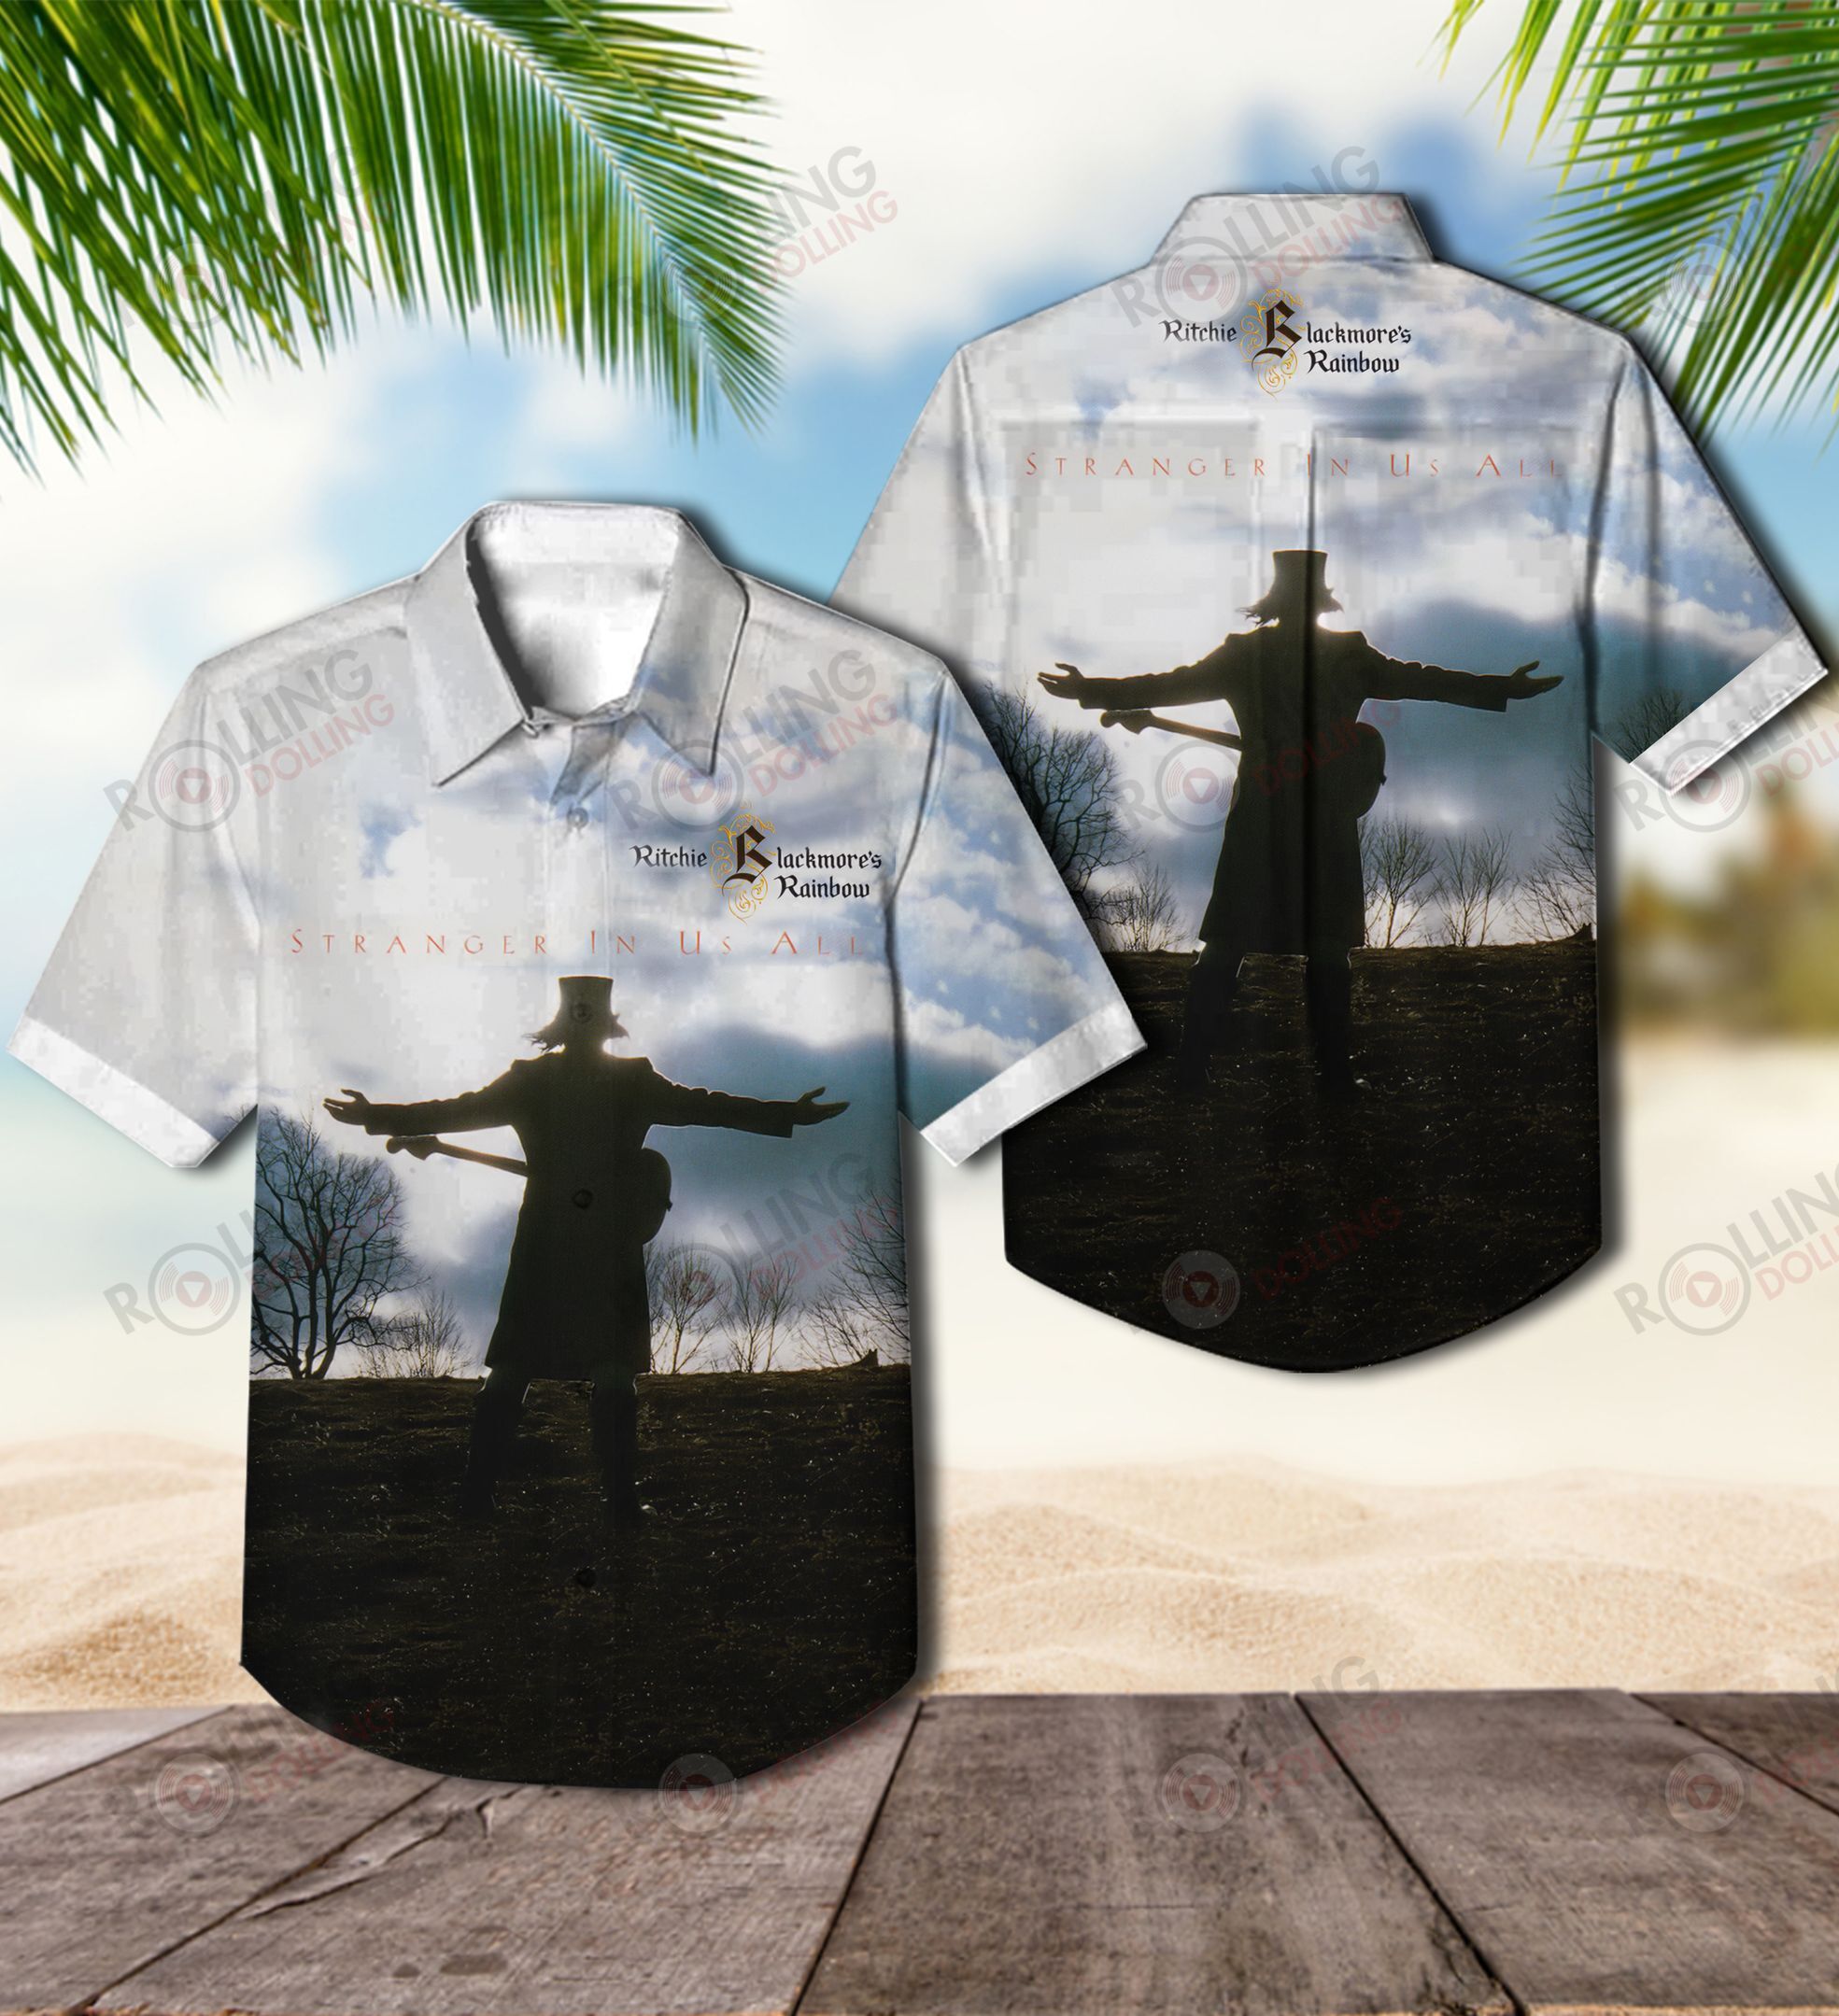 We have compiled a list of some of the best Hawaiian shirt that are available 13